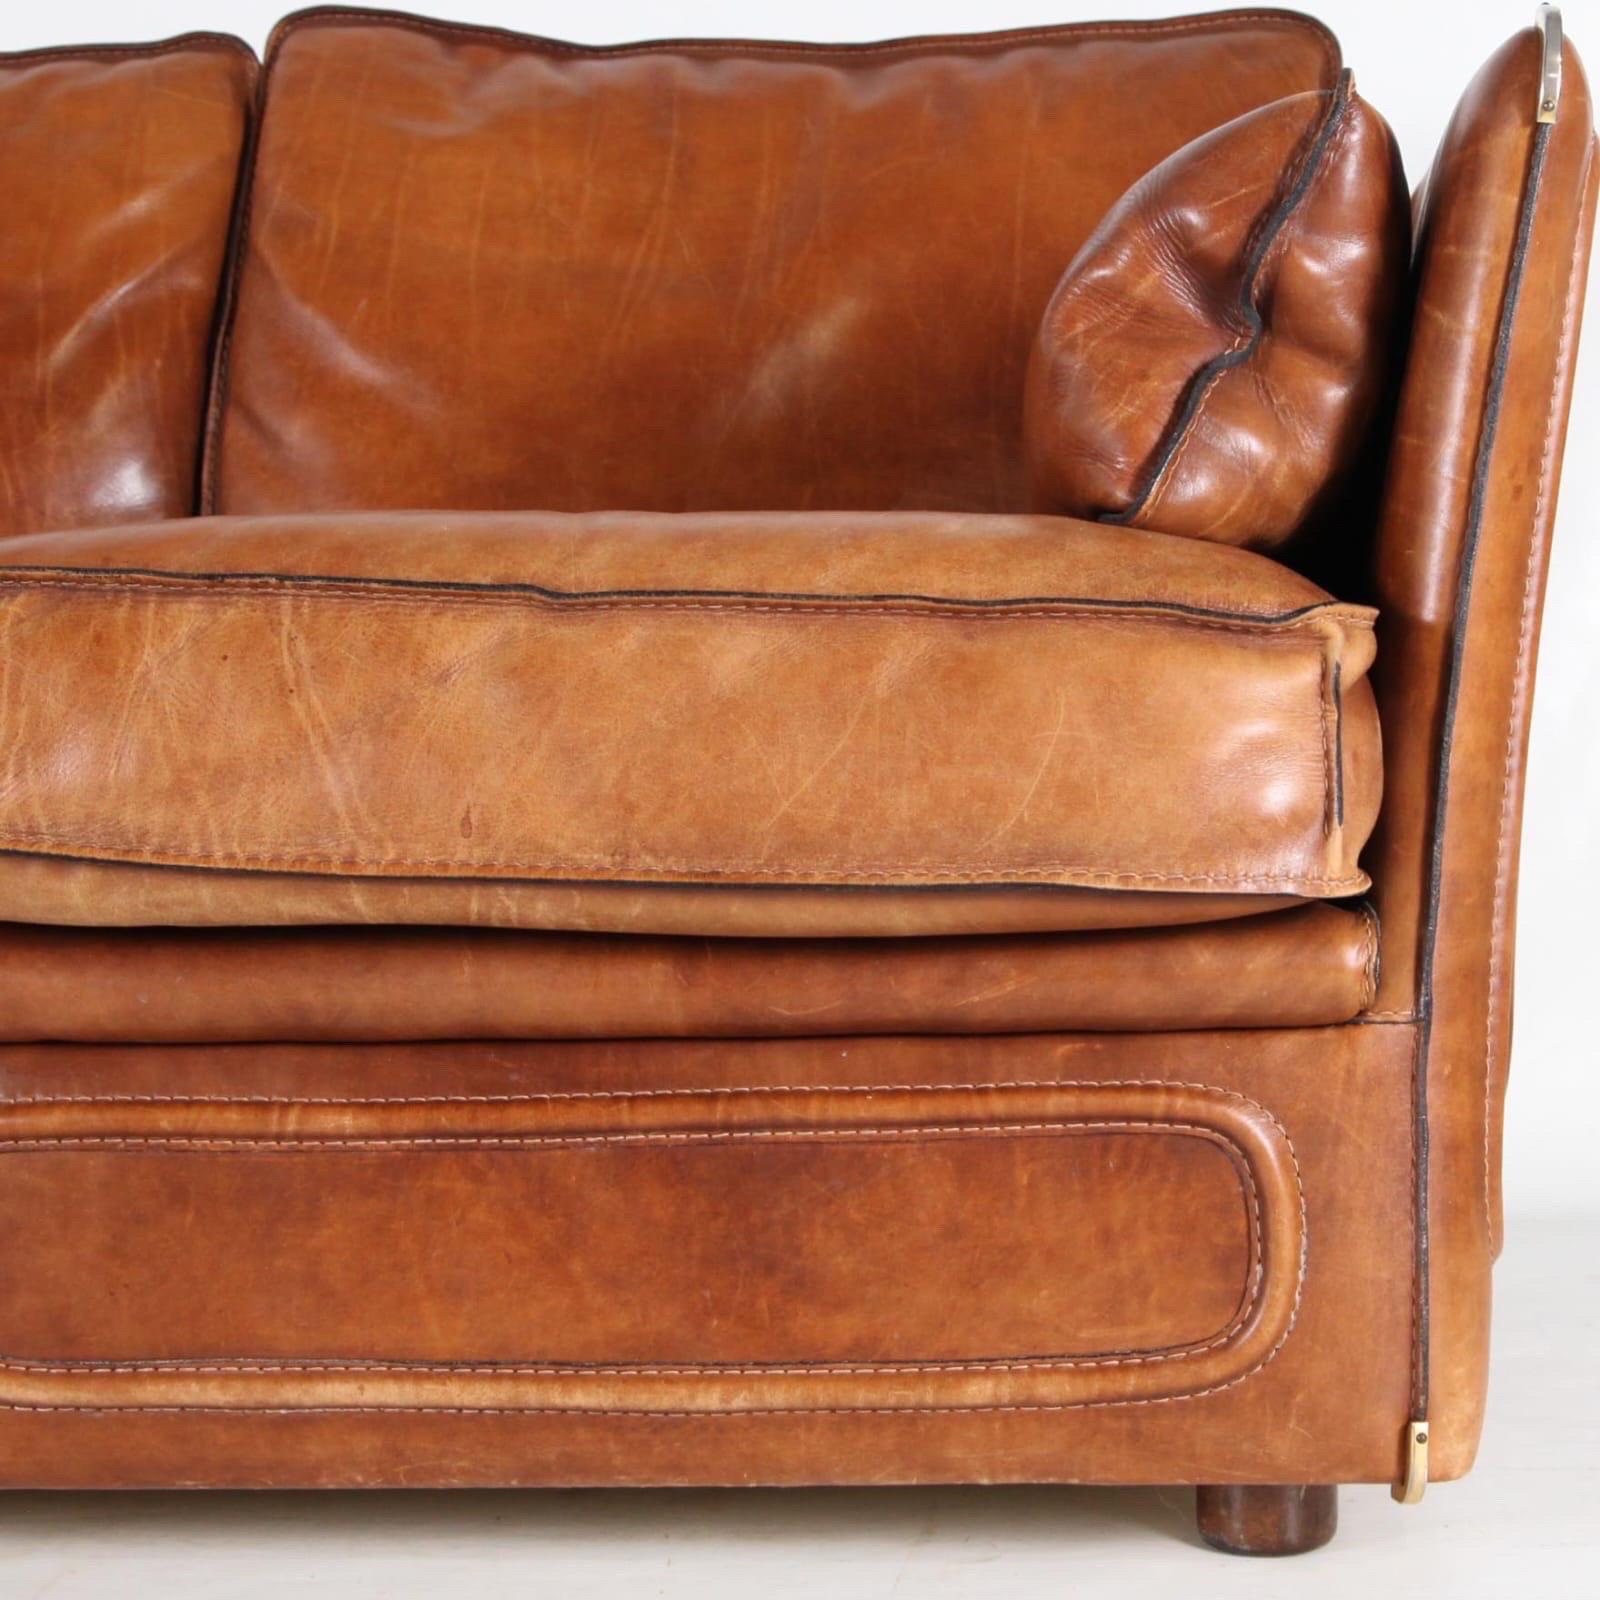 Roche Bobois 3 seaters leather sofa from the seventies. Thick buffalo leather, wooden legs, brass corners, very good quality. 
Comfortable, very good condition and wonderful patina.
Loveseat (2 seaters) available too on this site. 